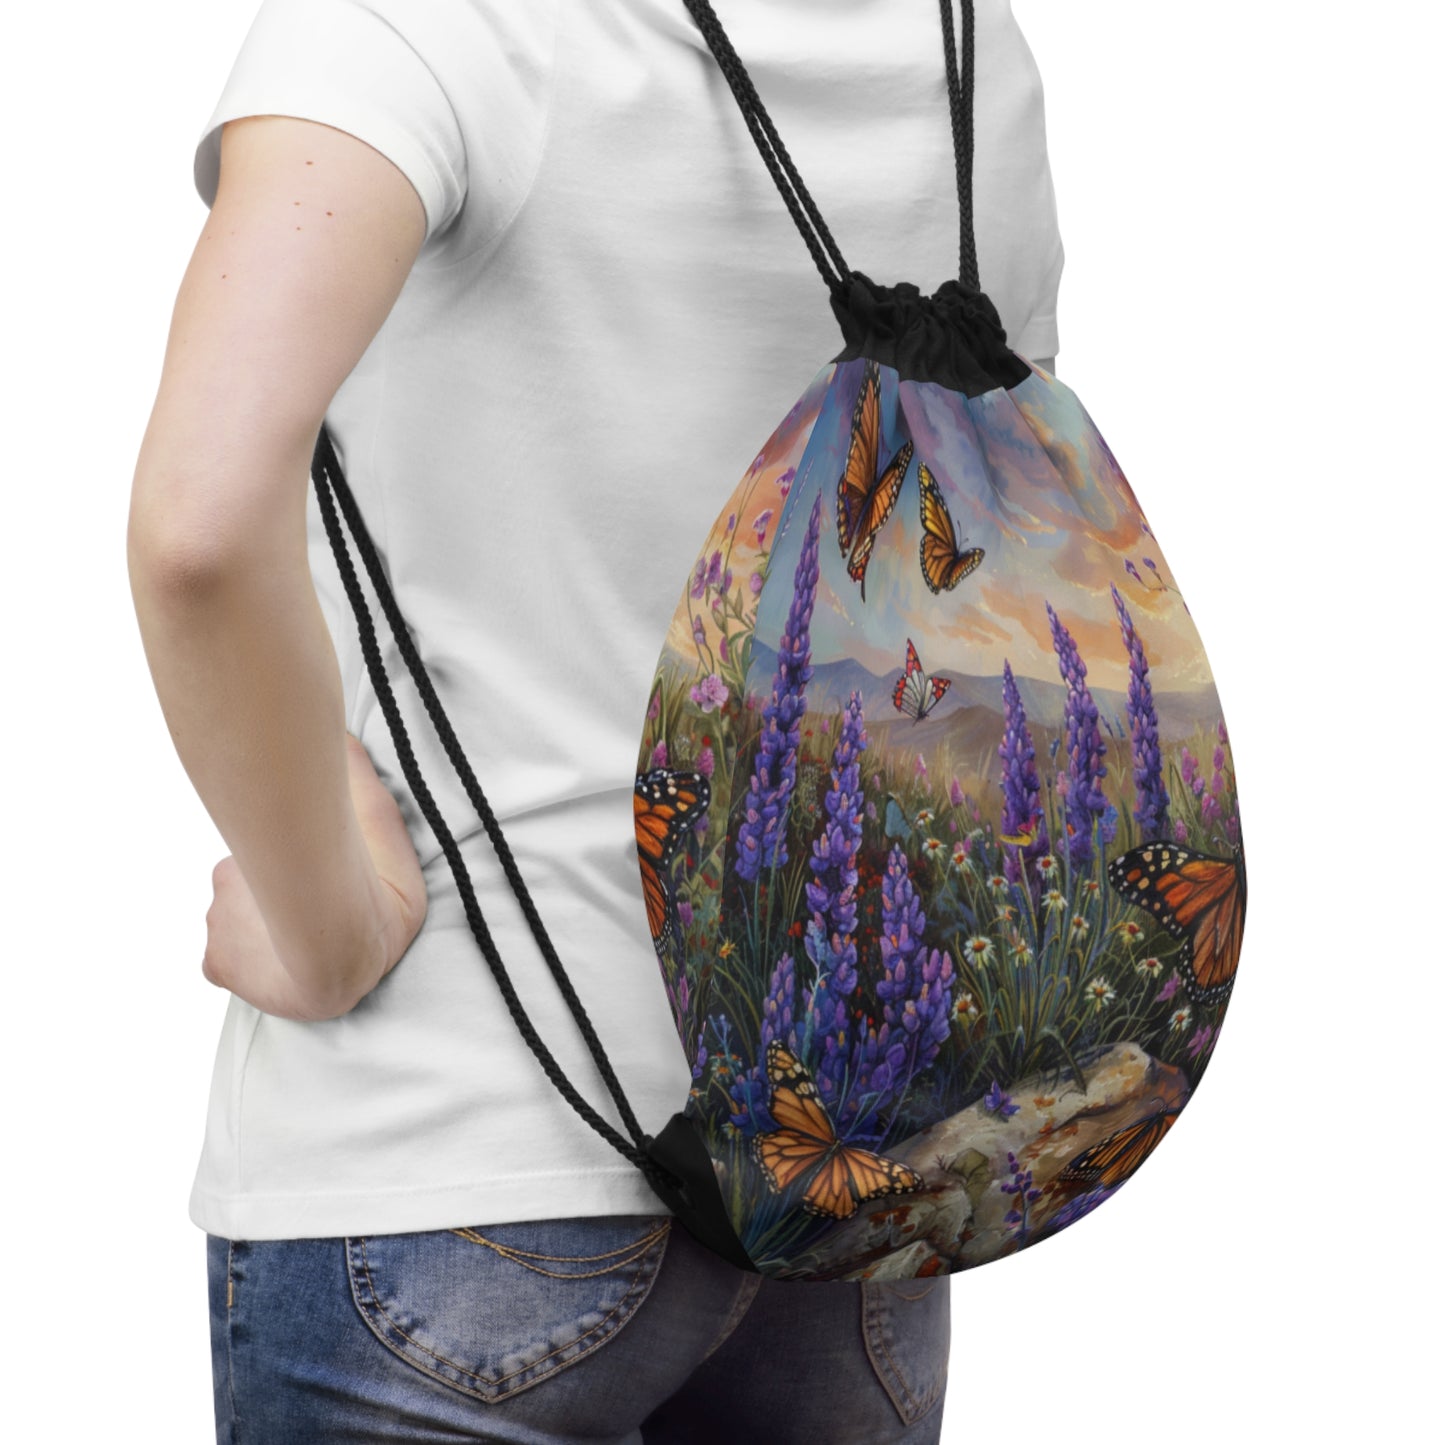 Butterfly Flowers 1 Drawstring Bag